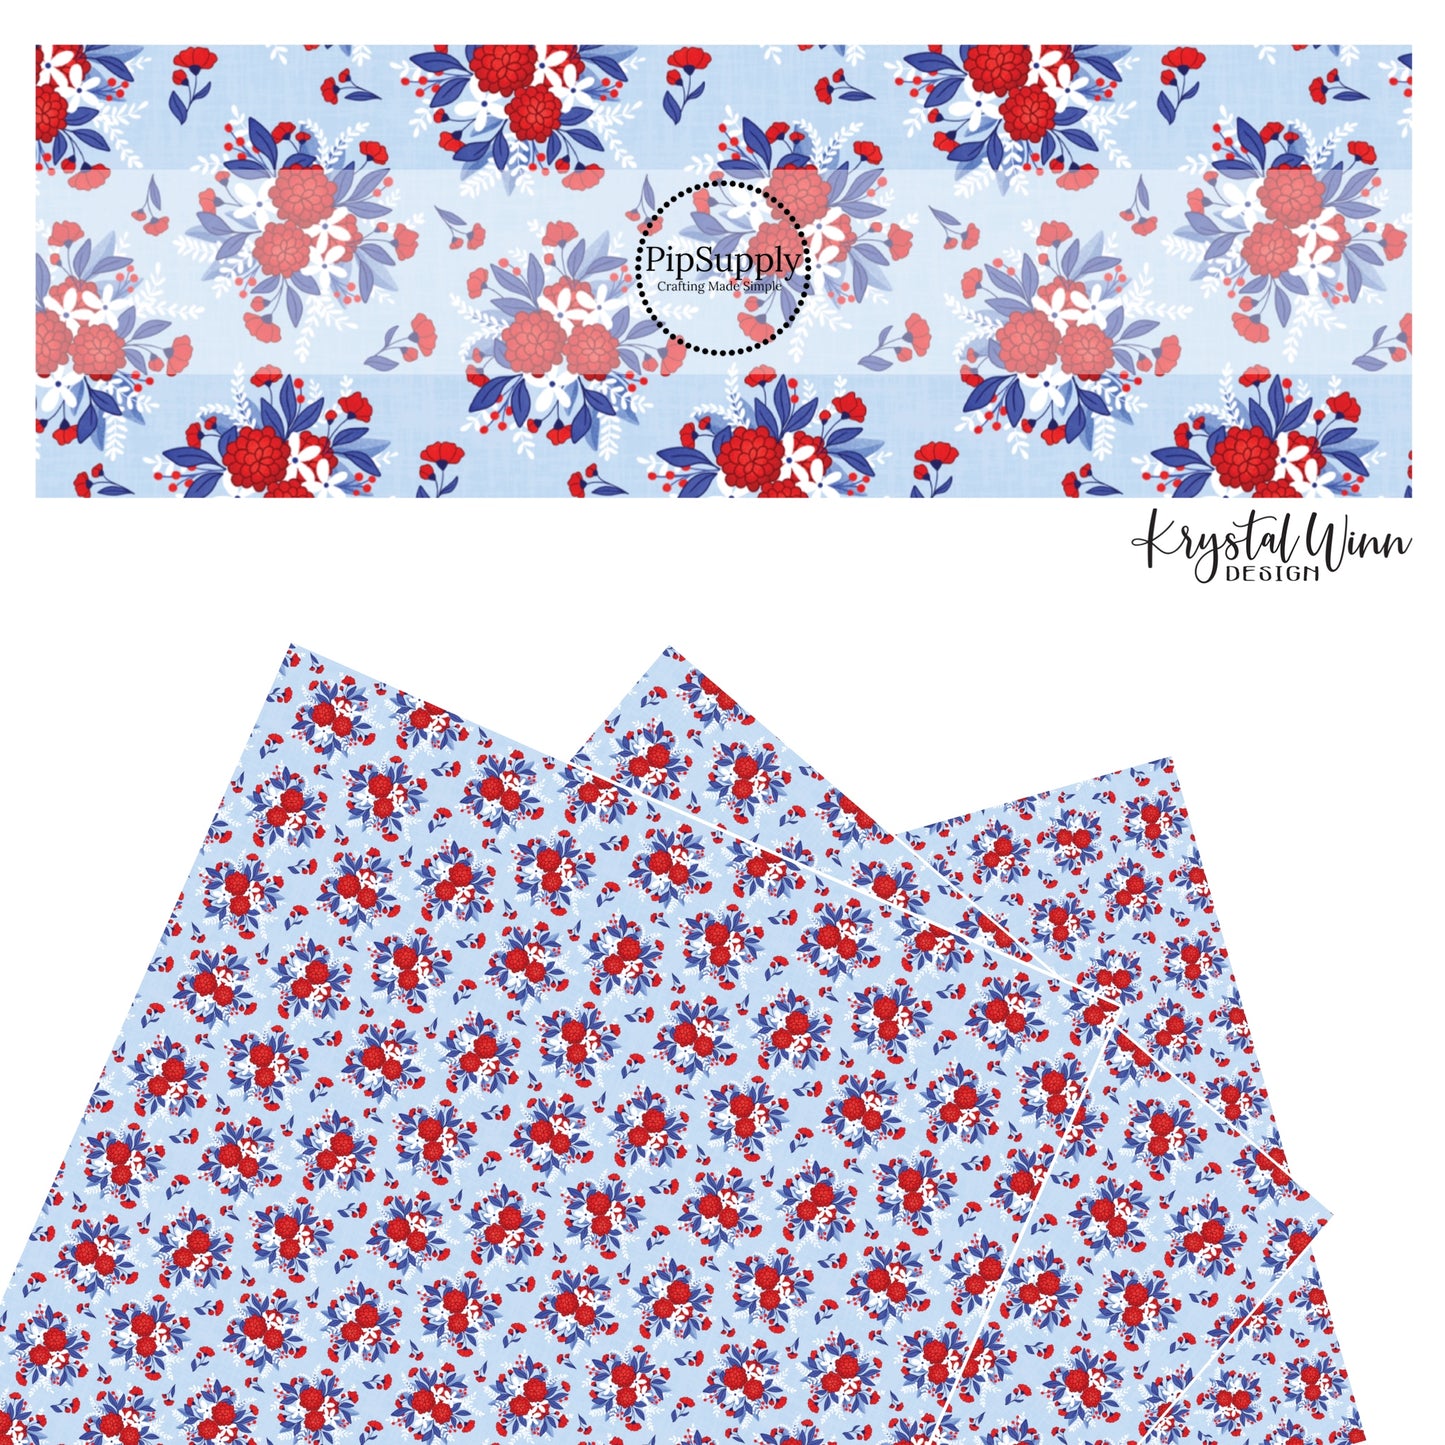 These red, white, and blue floral bouquets on light blue faux leather sheets contain the following design elements: flowers in the colors of royal blue, red, and white.